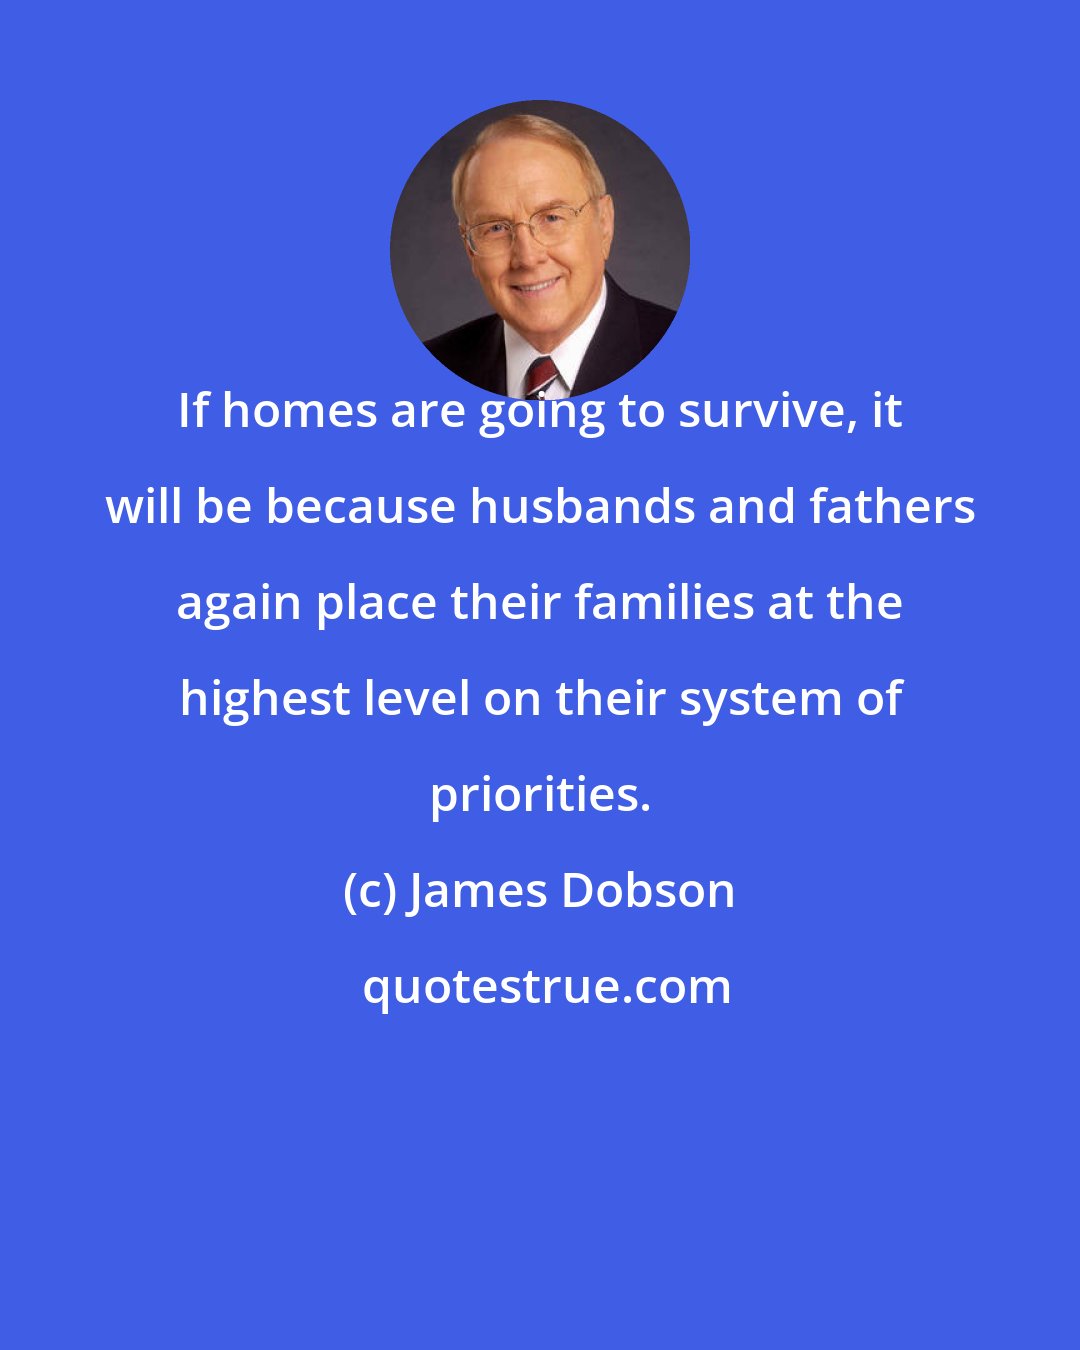 James Dobson: If homes are going to survive, it will be because husbands and fathers again place their families at the highest level on their system of priorities.